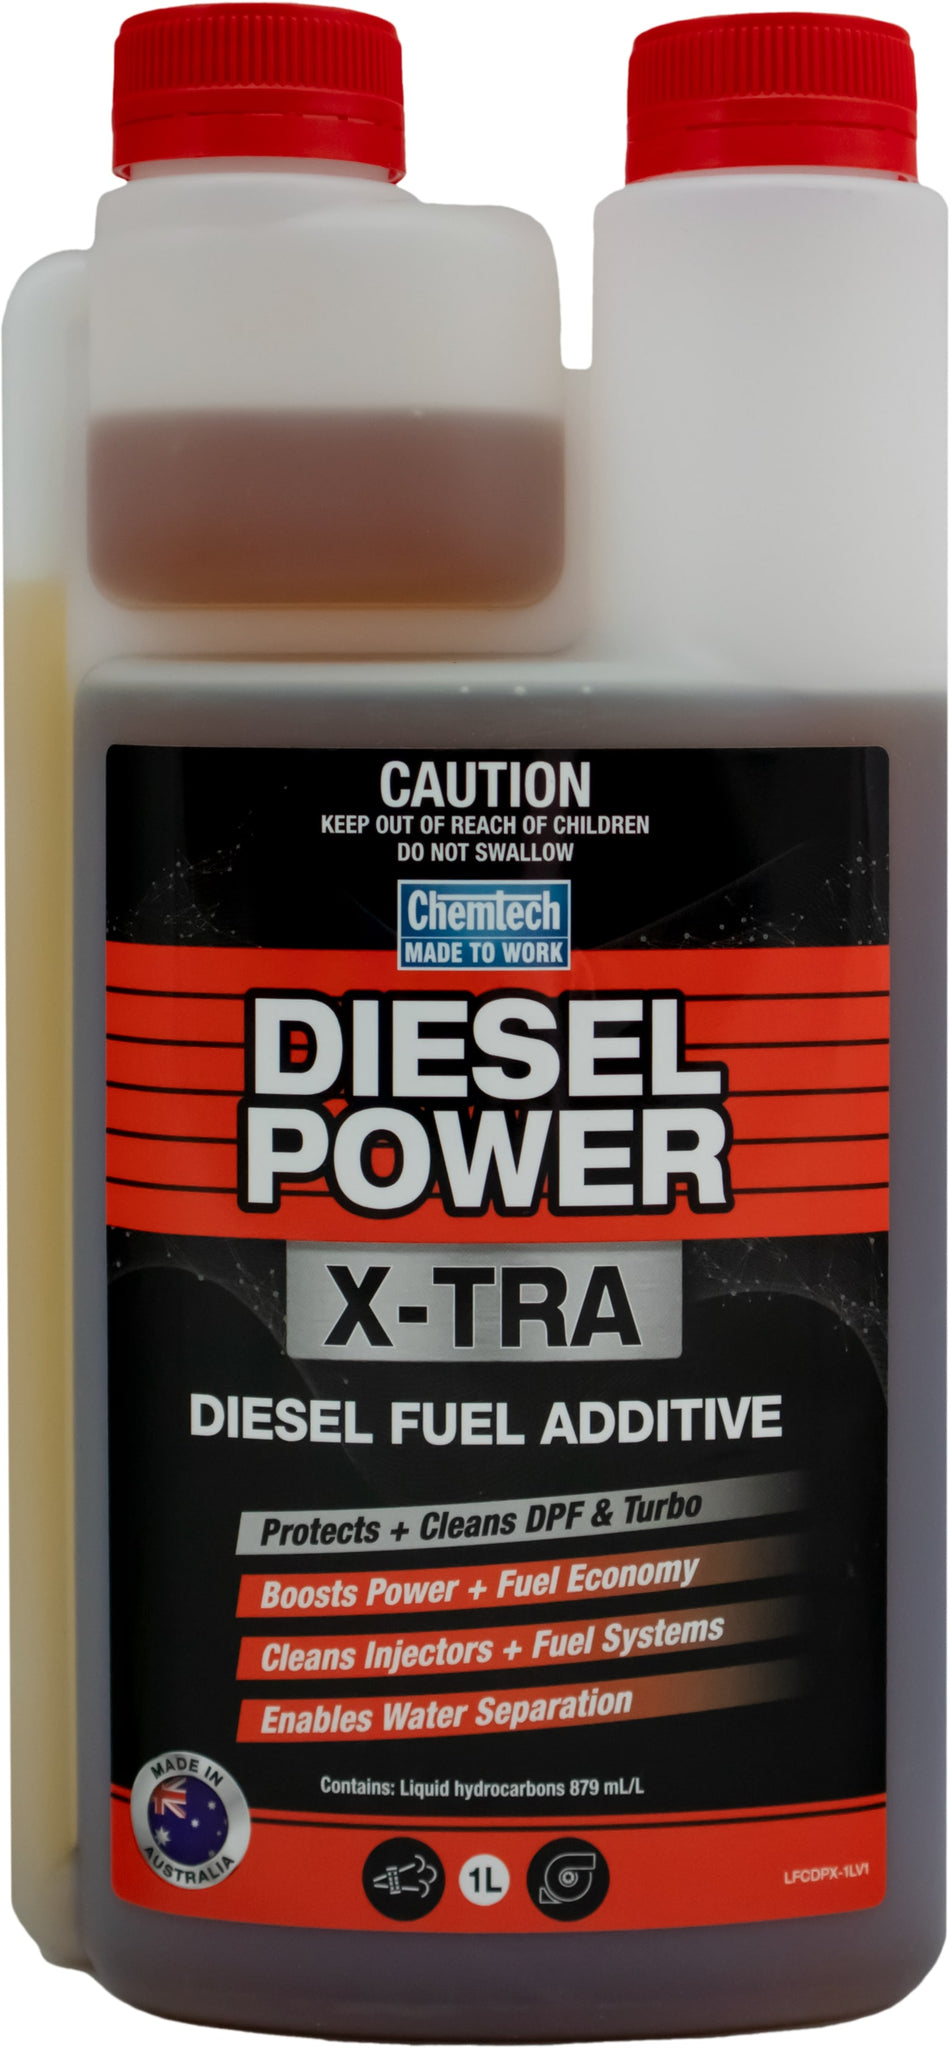 Chemtech® Diesel Power X-TRA – ITW Polymers and Fluids